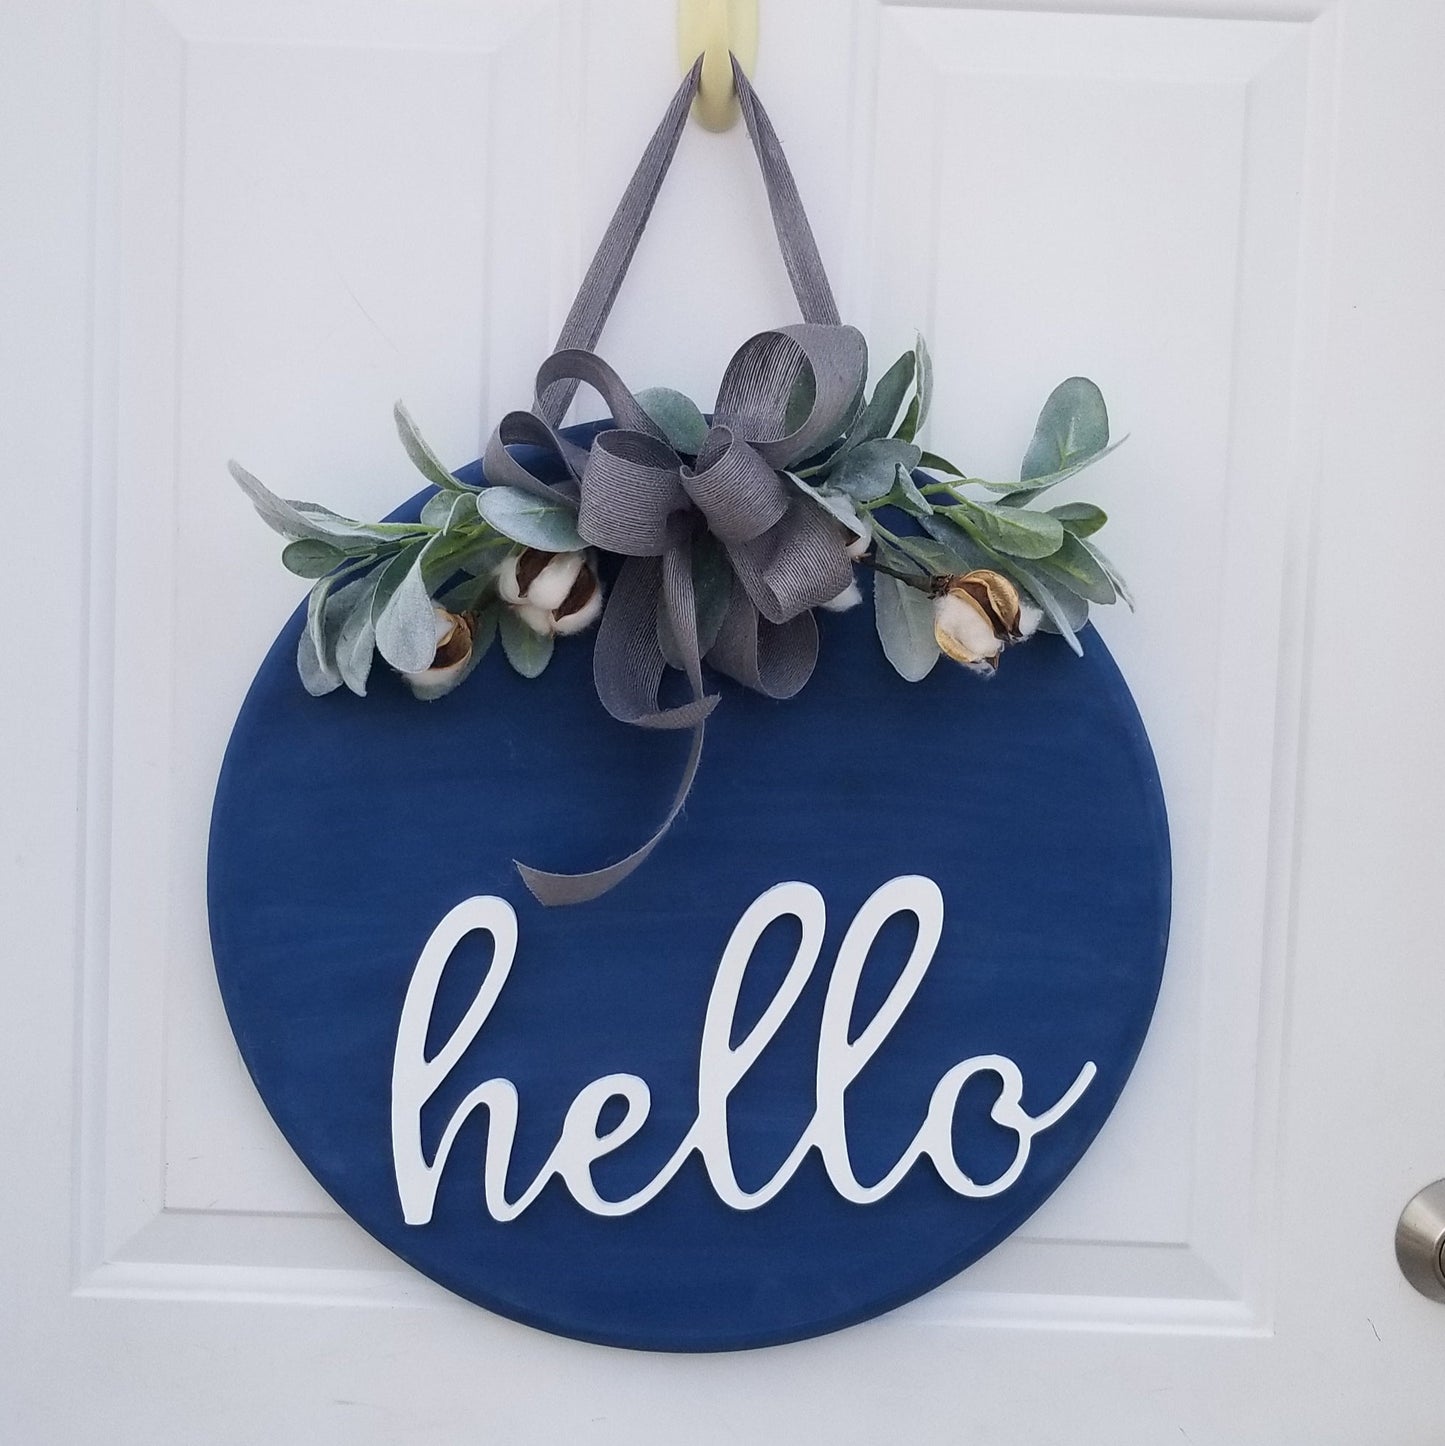 Hello doorhanger with greenery and bow